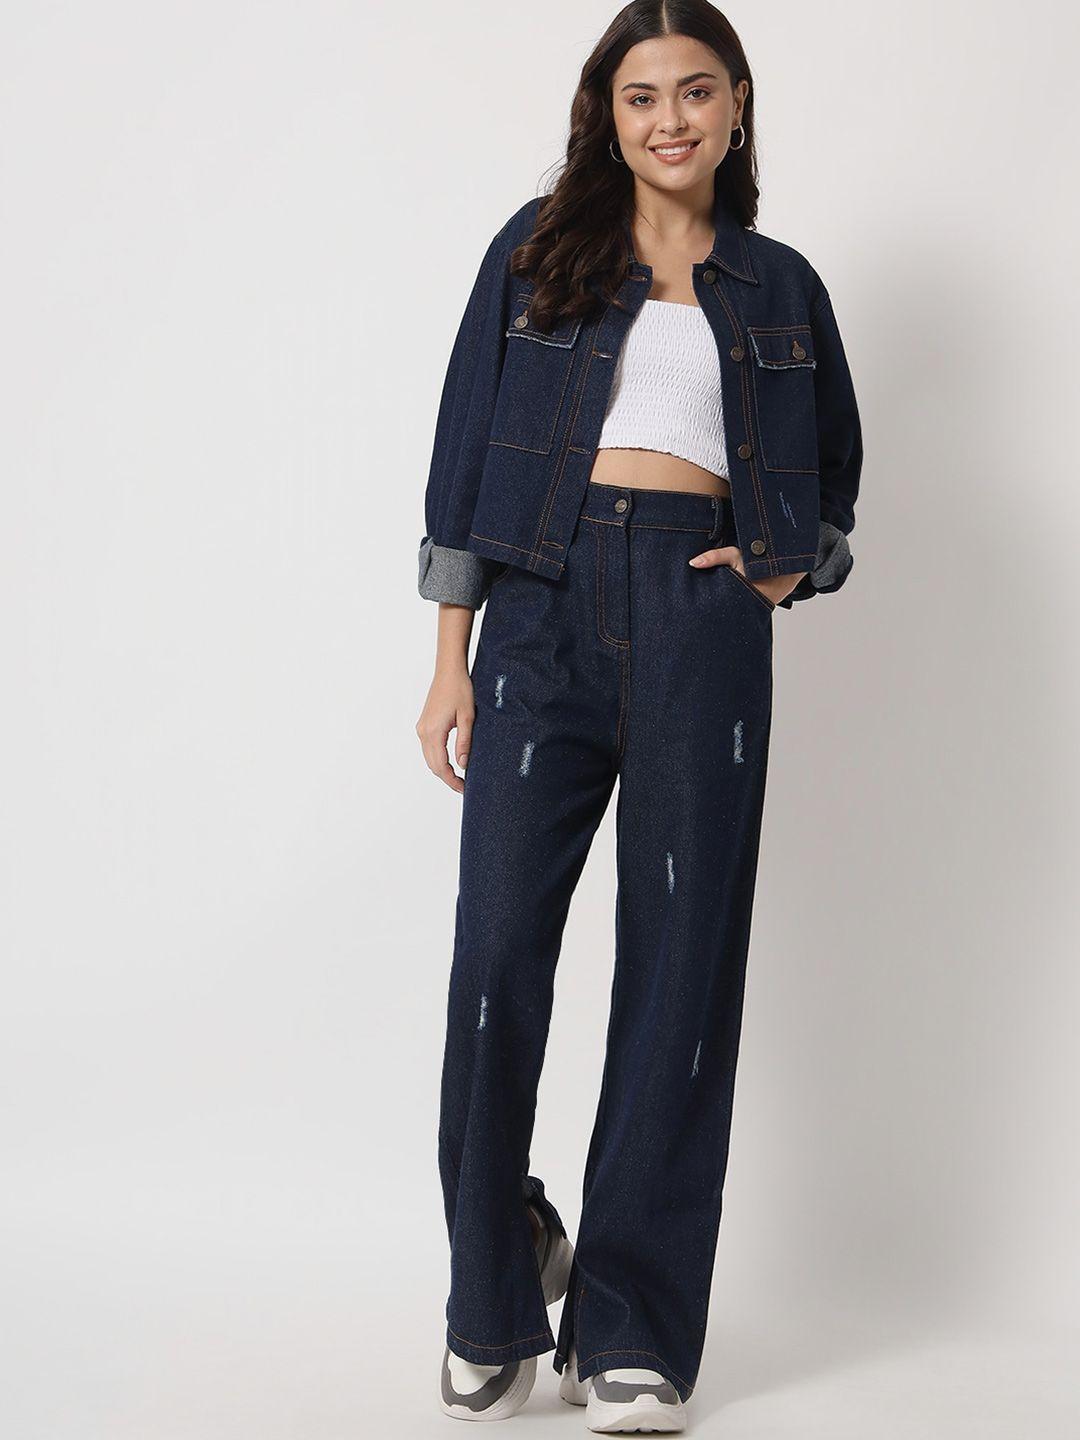 orchid hues women blue denim jacket with jeans